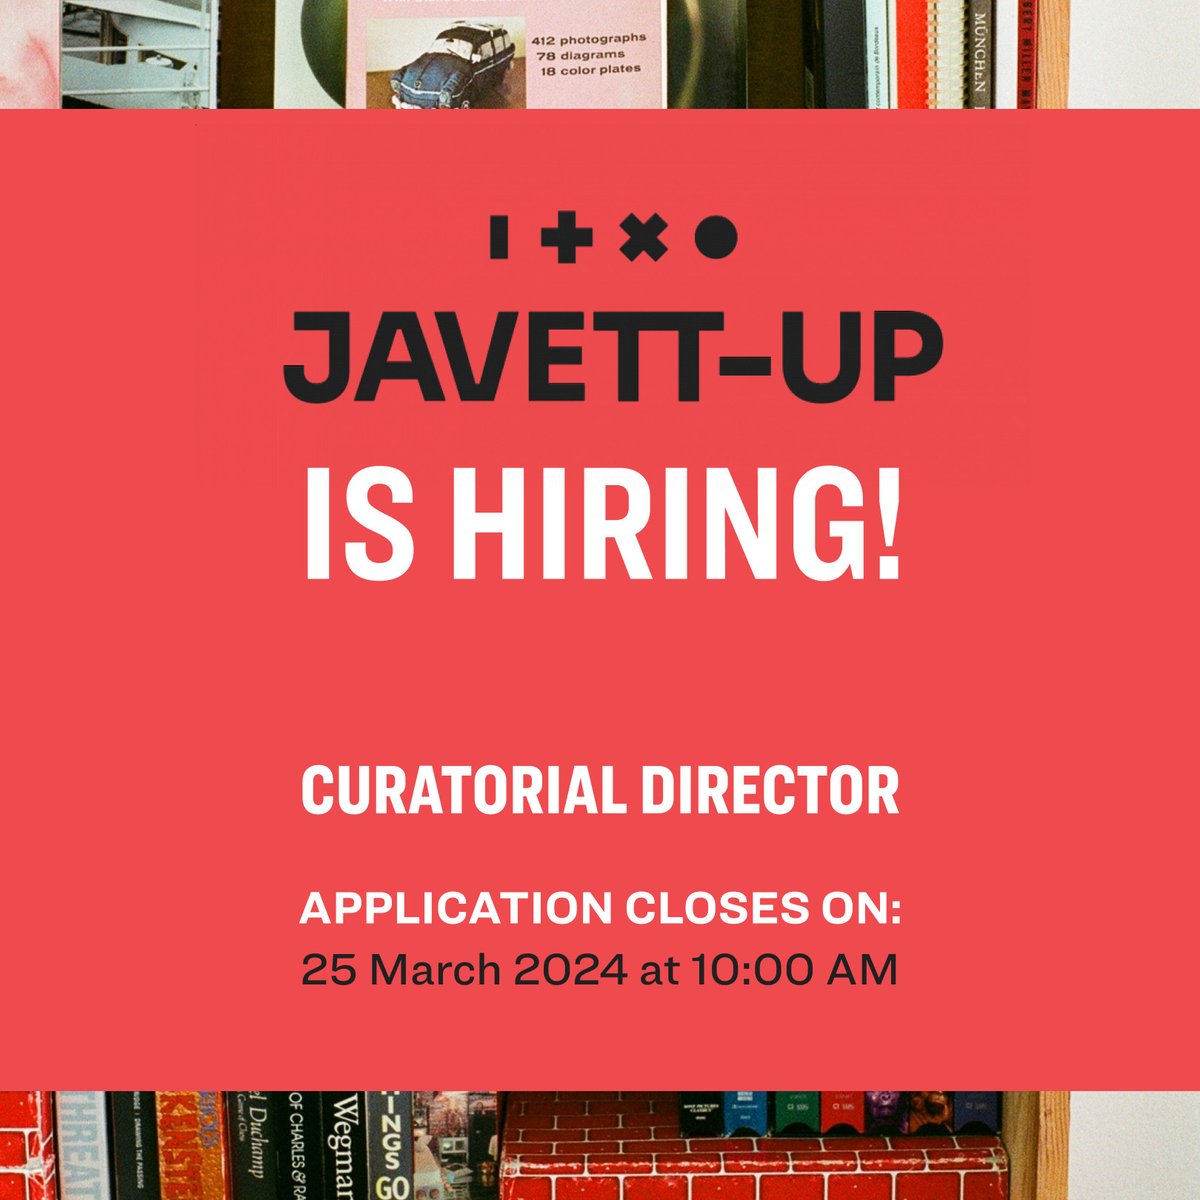 We have great news to share! @JavettUP, in its commitment to promoting inclusivity and equal opportunities for all, has reopened applications for the position of Curatorial Director. For more information, visit bit.ly/3v4PJv8. NOTE: Prev. applicants need not re-apply.